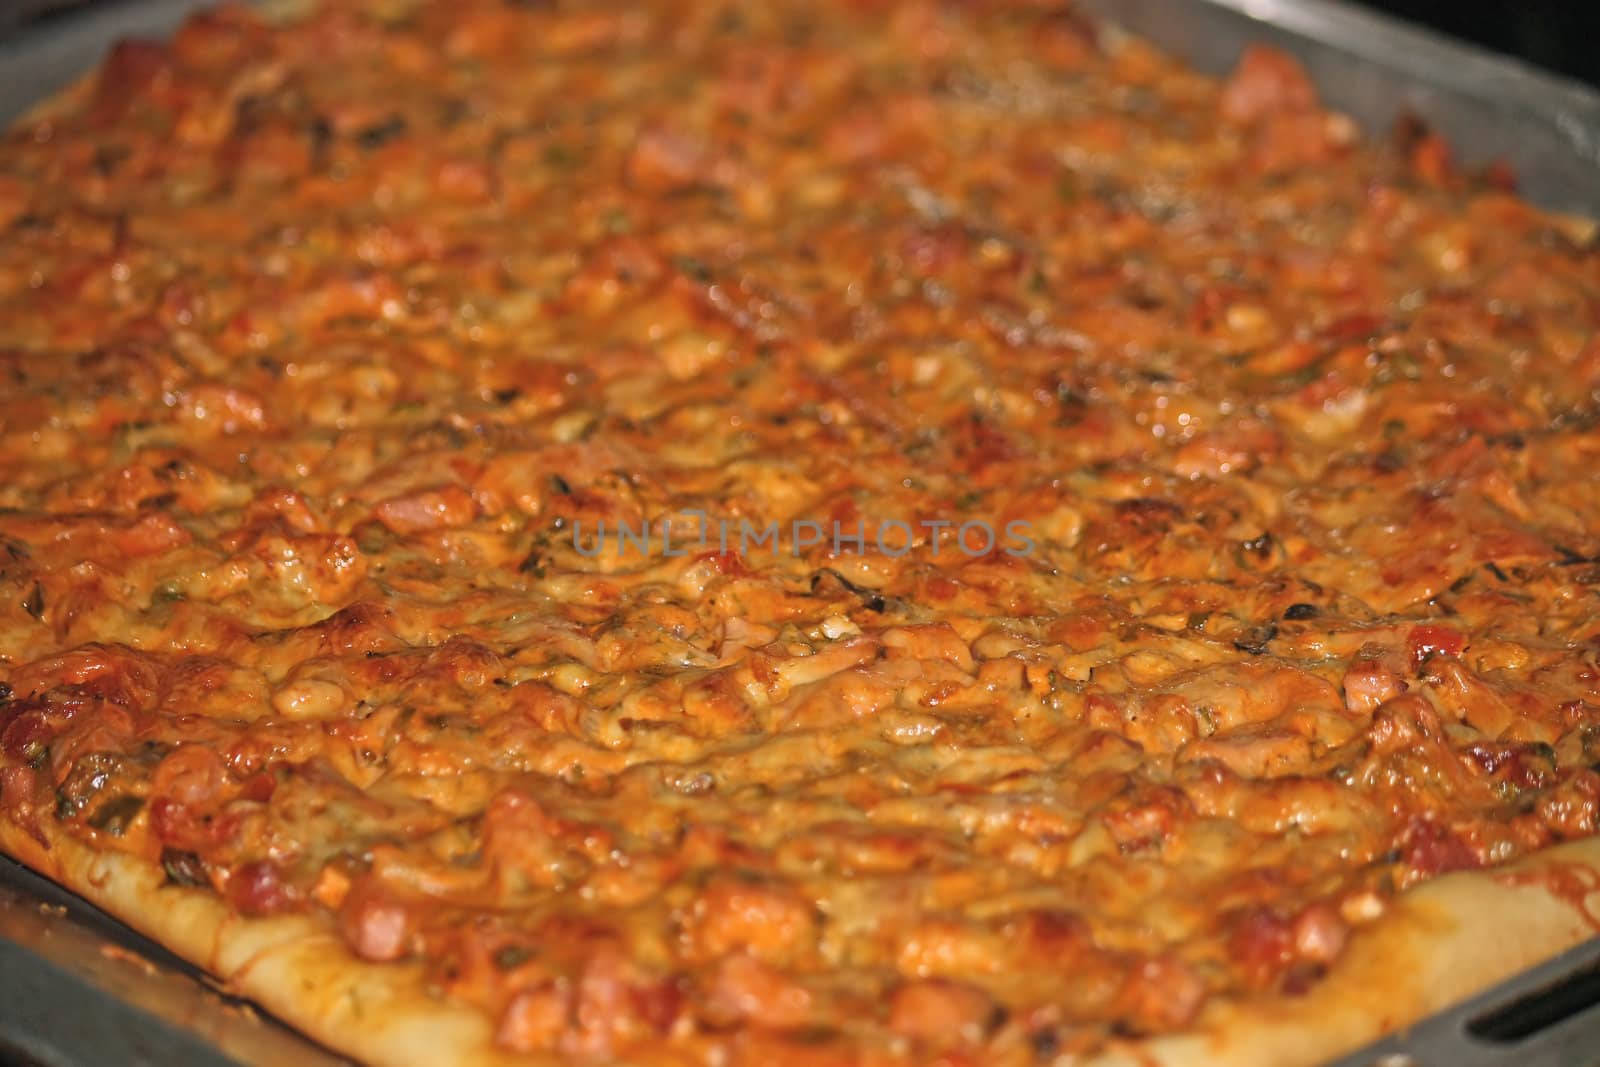 Thin layer of the test and thick layer of stuffing. It is very tasty pizza.